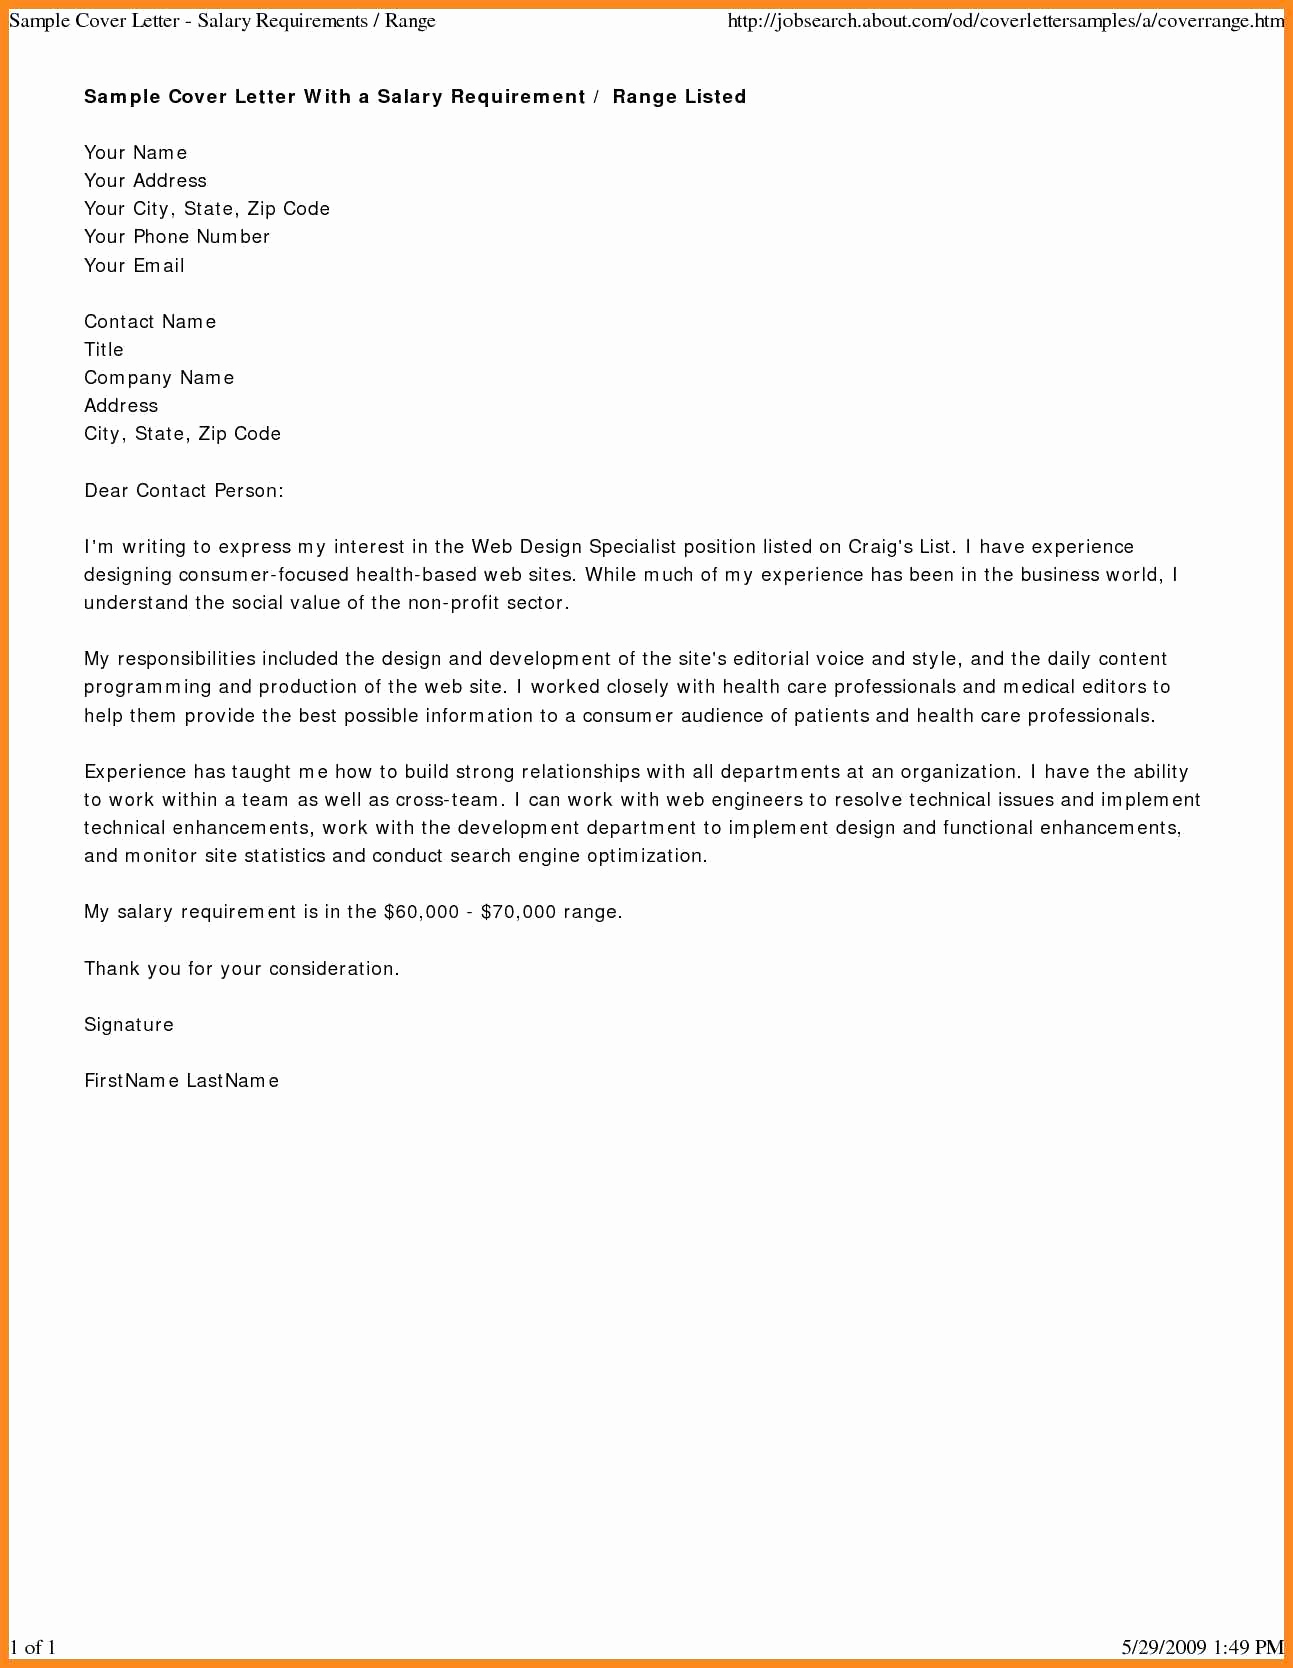 Proof Of Health Insurance Letter Template - 50 Unique Sample Proof Health Insurance Letter Documents Ideas